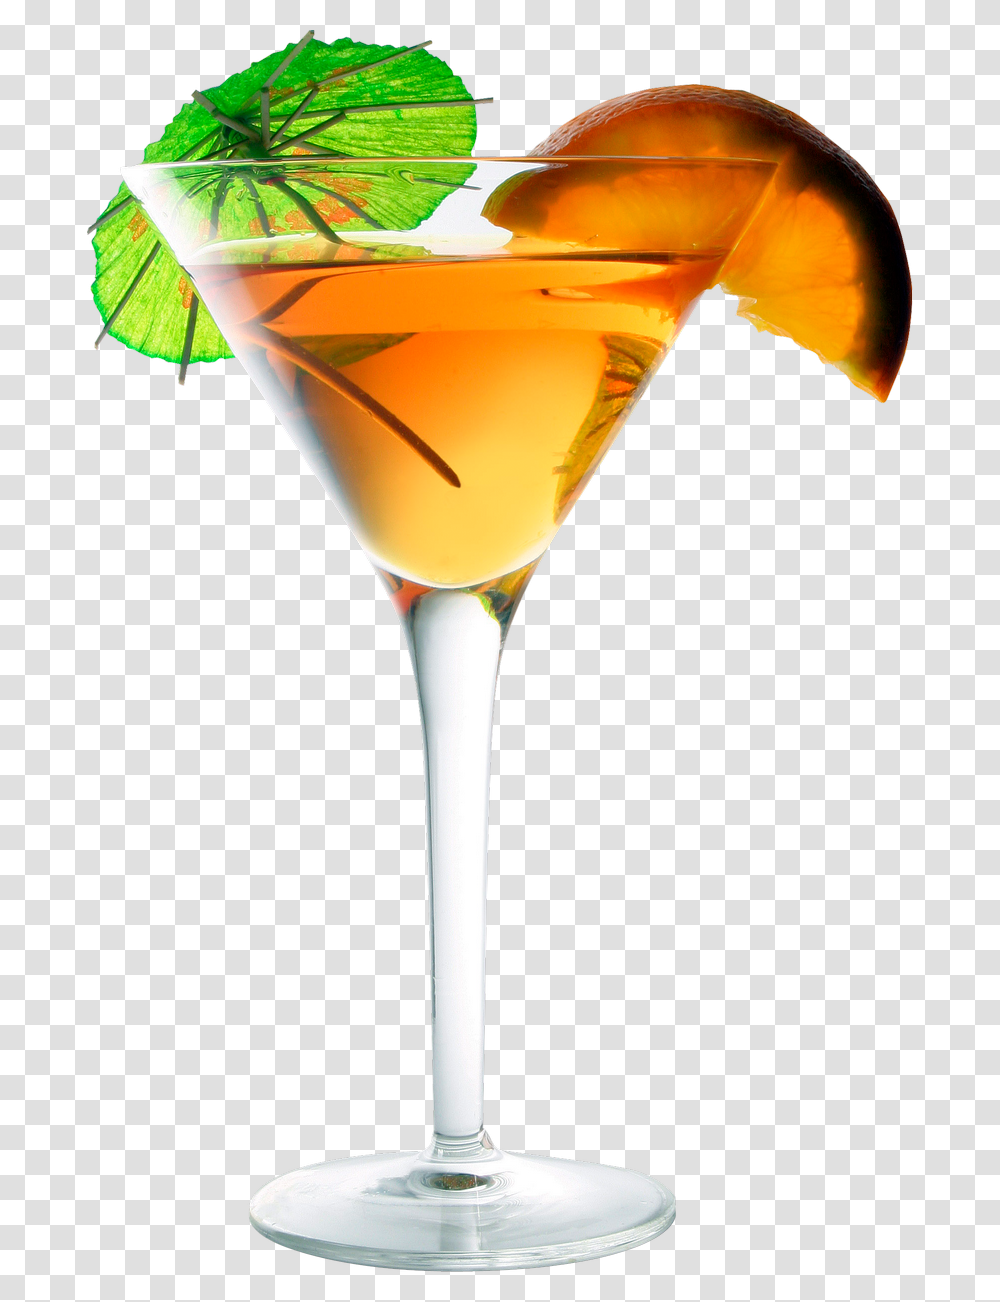 Wine Glass Image Cocktail Wine Glass, Alcohol, Beverage, Drink, Lamp Transparent Png